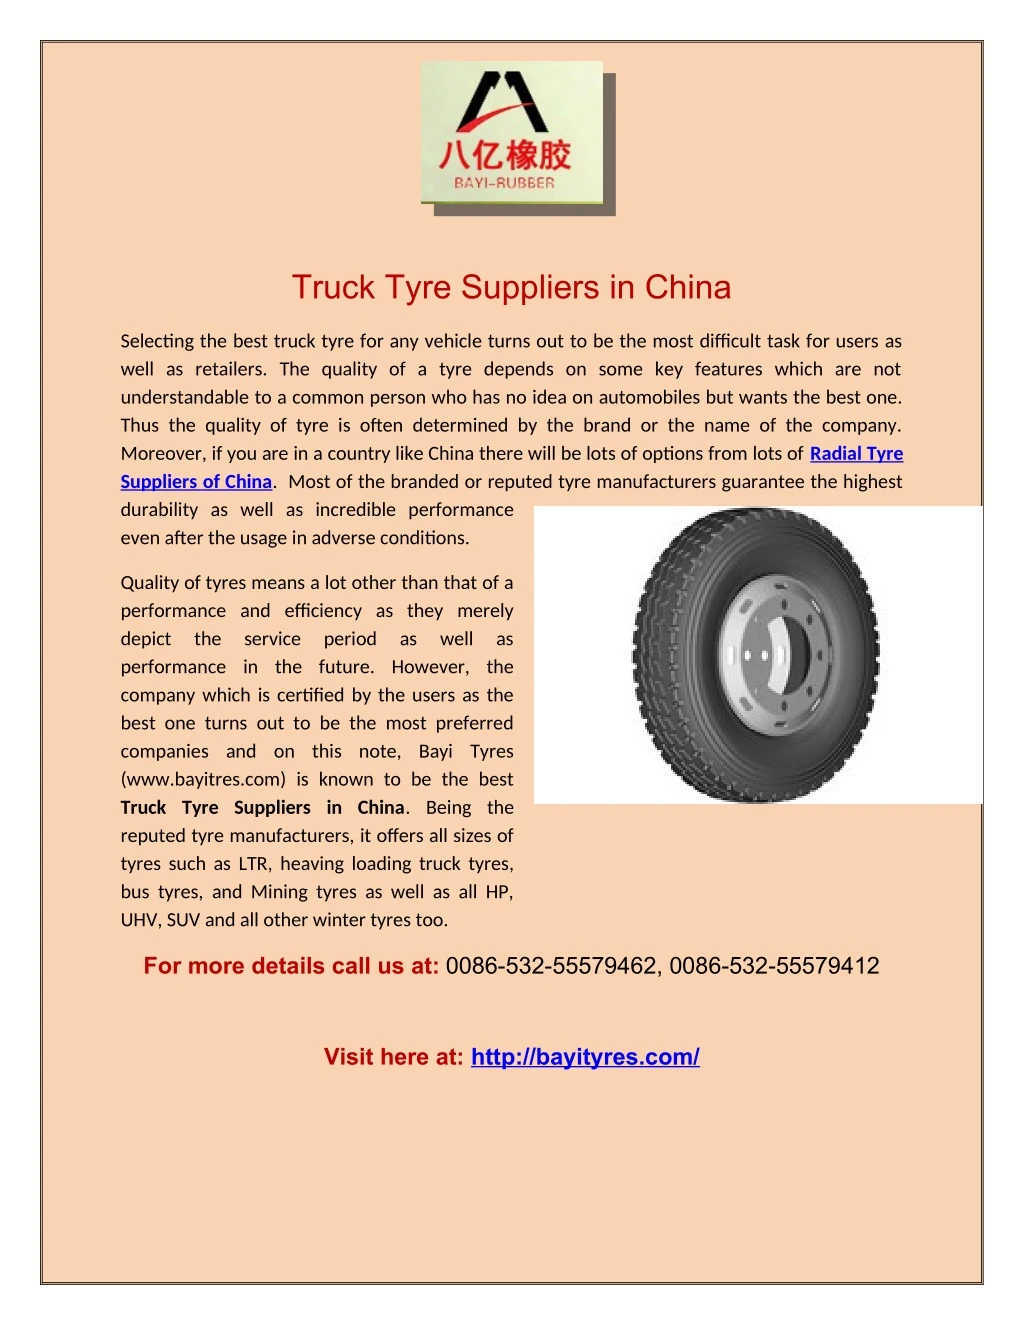 truck tyre suppliers in china